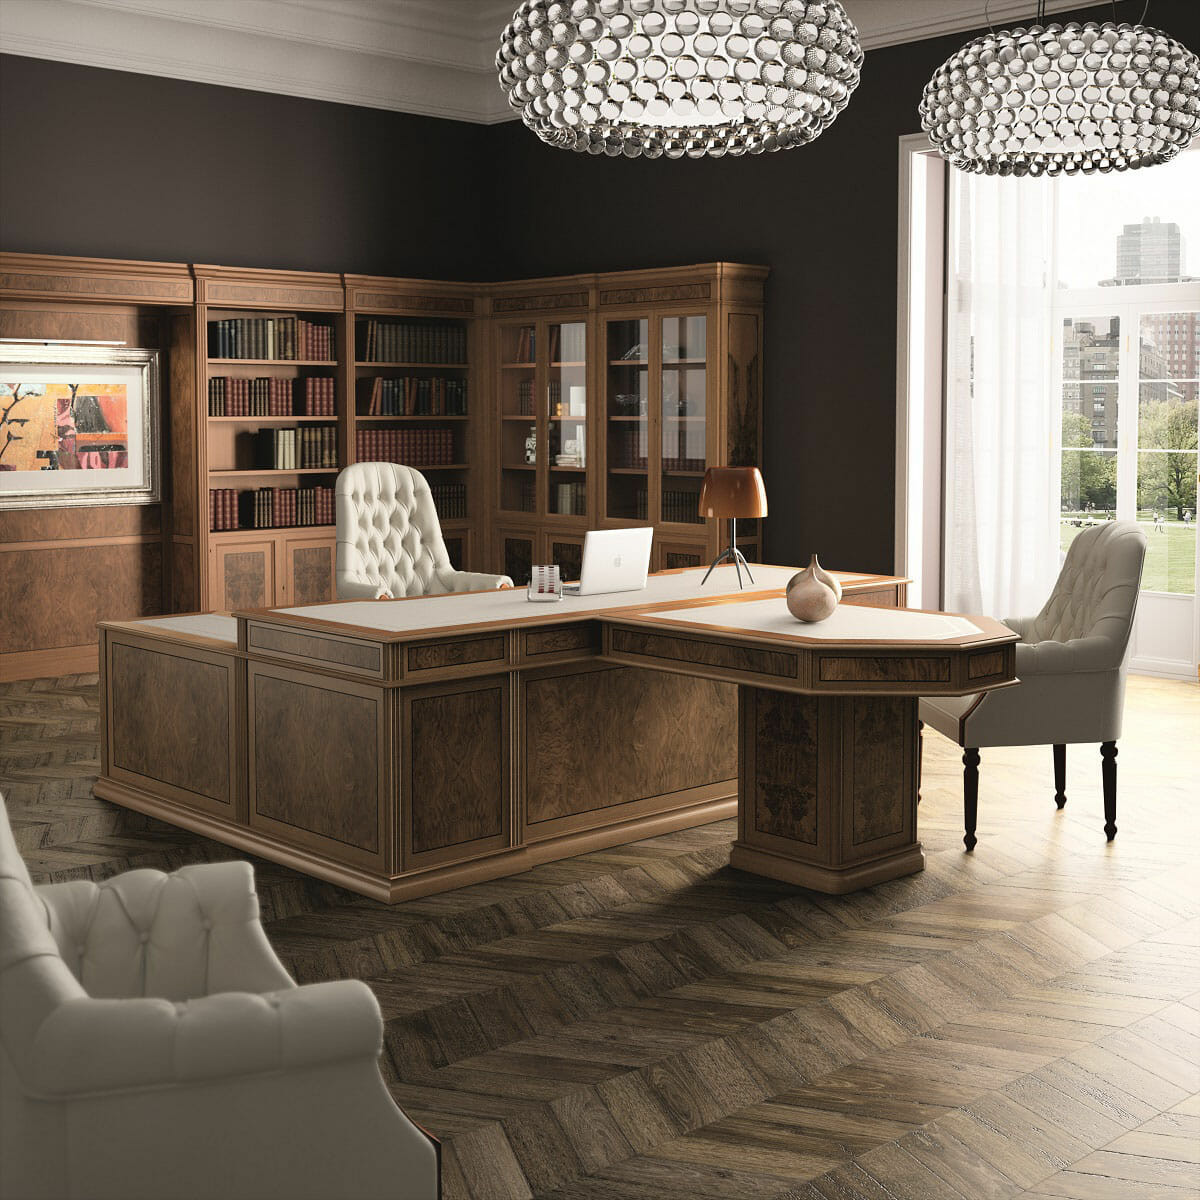 ofifran-art-luxe-office-furniture-collection-class-chairs